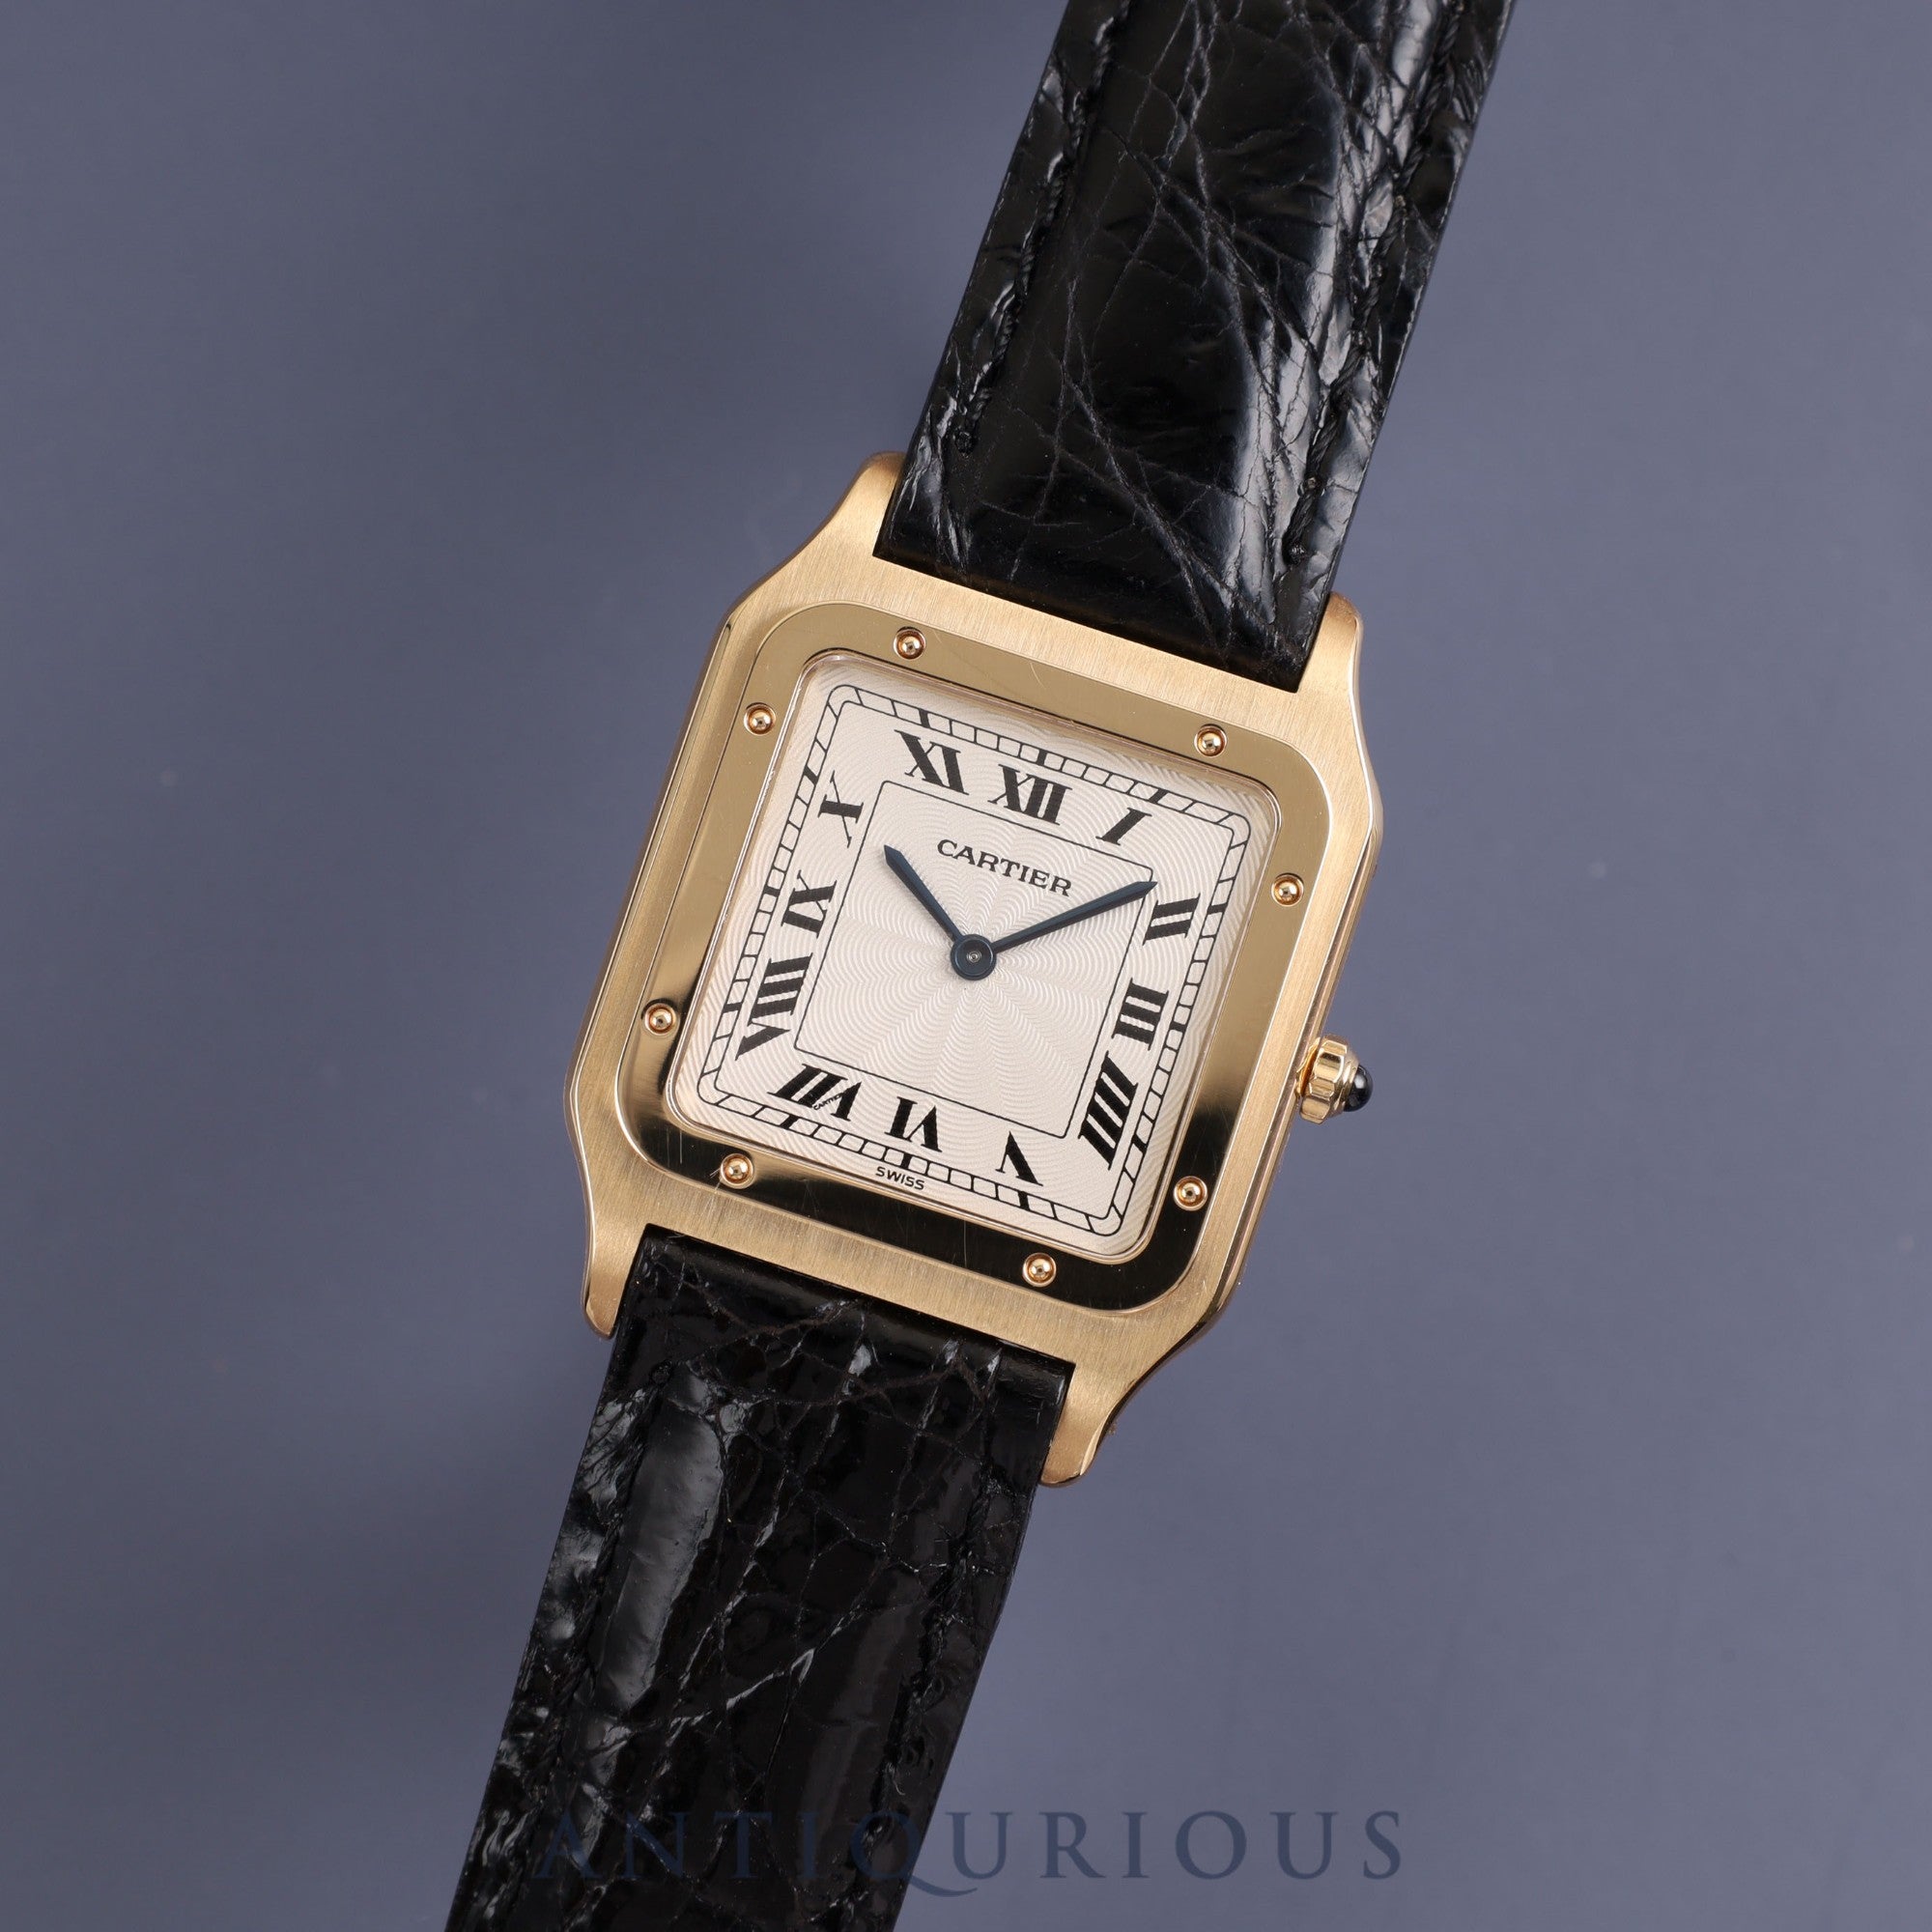 CARTIER SANTOS DUMONT LM EXTRASLIM W1505453 Manual winding Cal.21MC 750YG Leather Genuine buckle (750) Guilloché Ivory dial Box